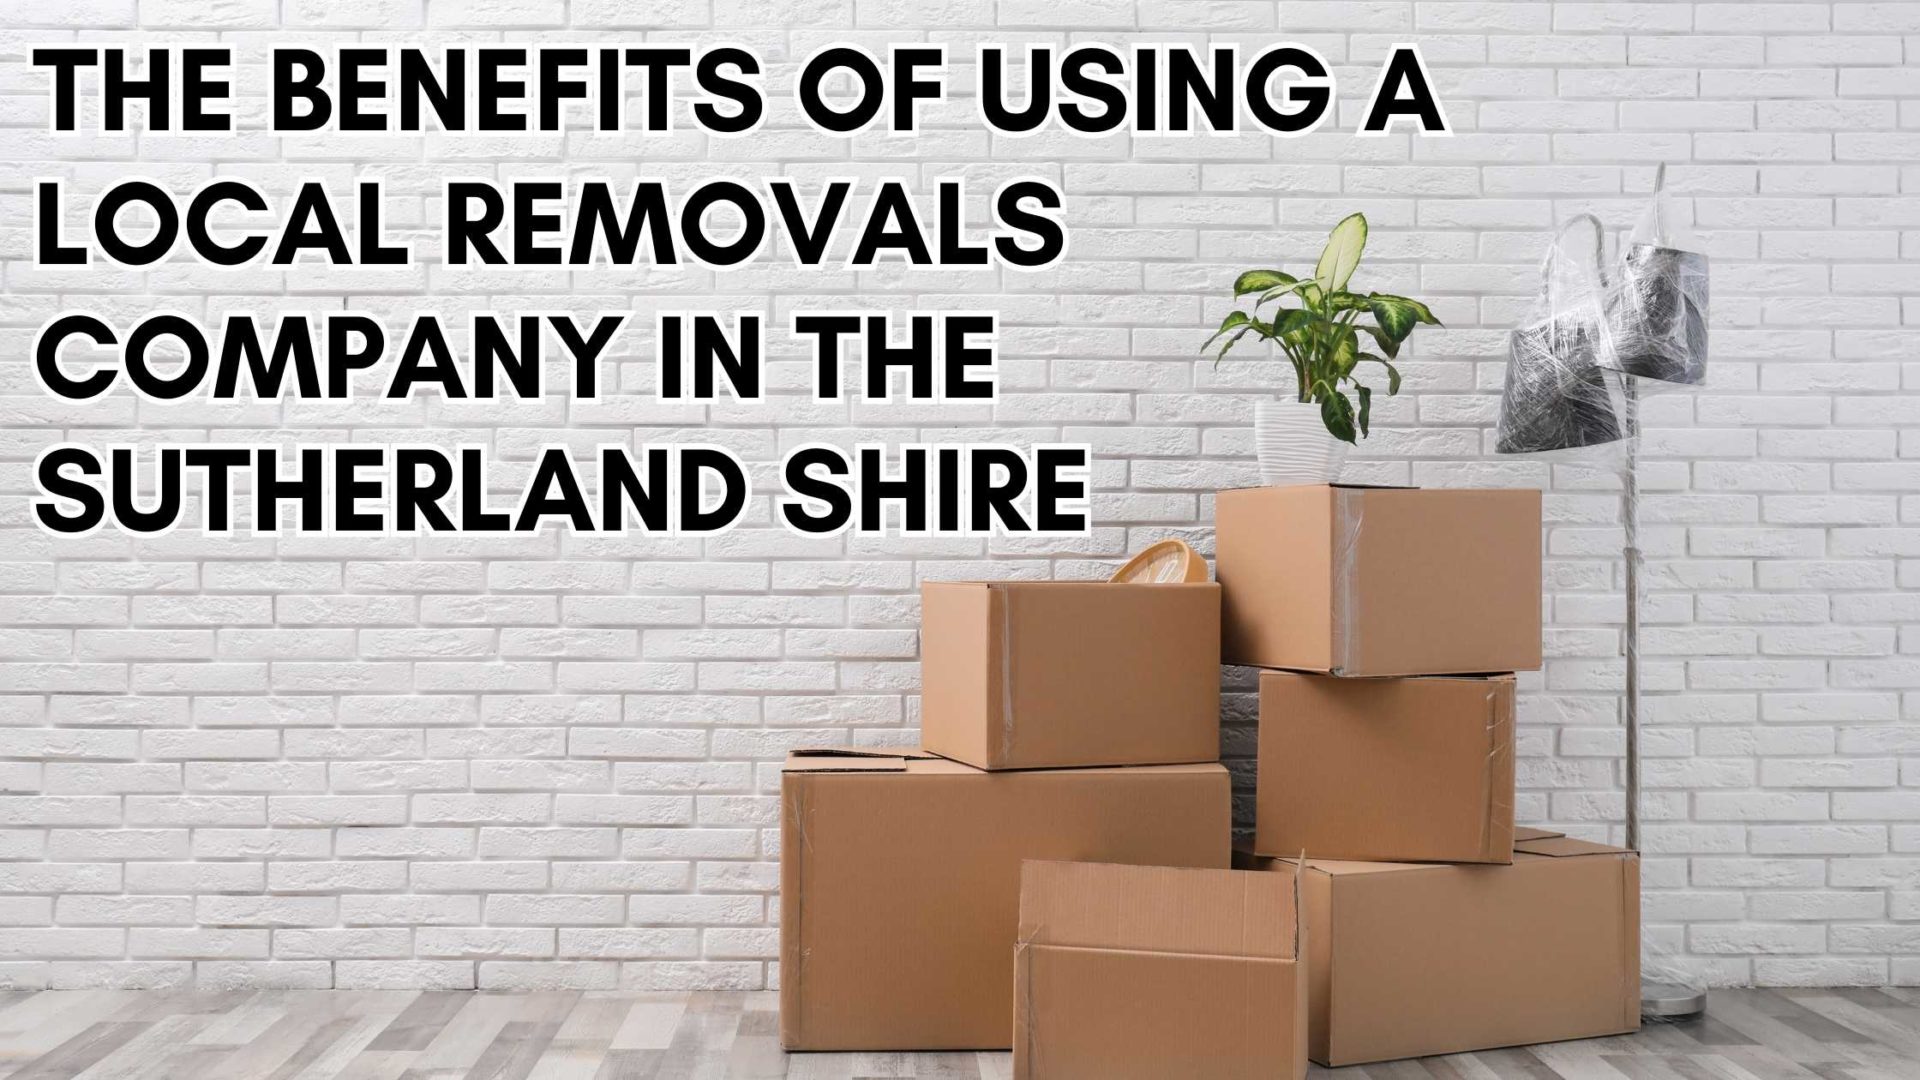 The Benefits of Using a Local Removals Company in the Sutherland Shire